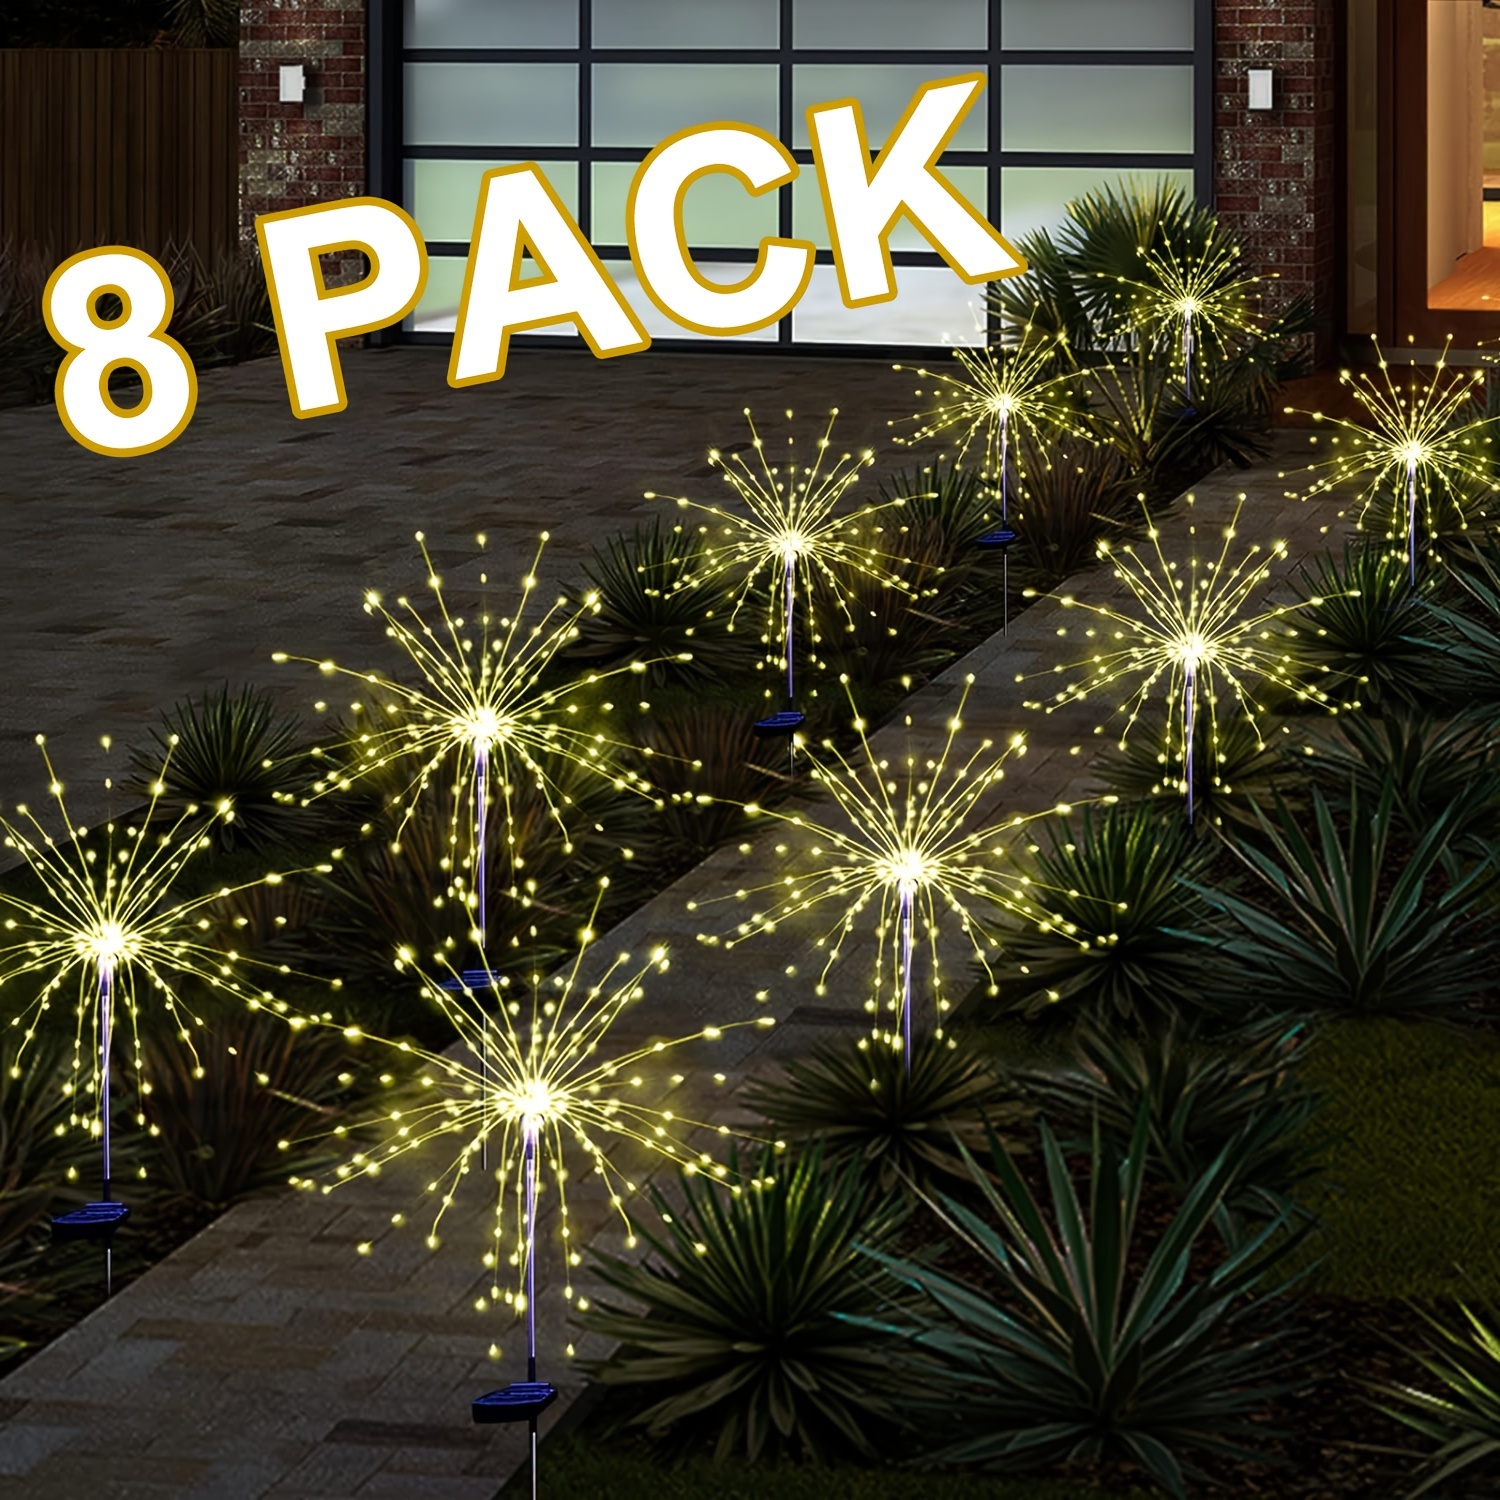 

8 Pack 480leds Outdoor Solar Firework Lights Upgraded Solar Powered Sparkler Lights With 8 Lighting Modes For Outside Garden Yard Party Decor ( Warm/ Multicolor)